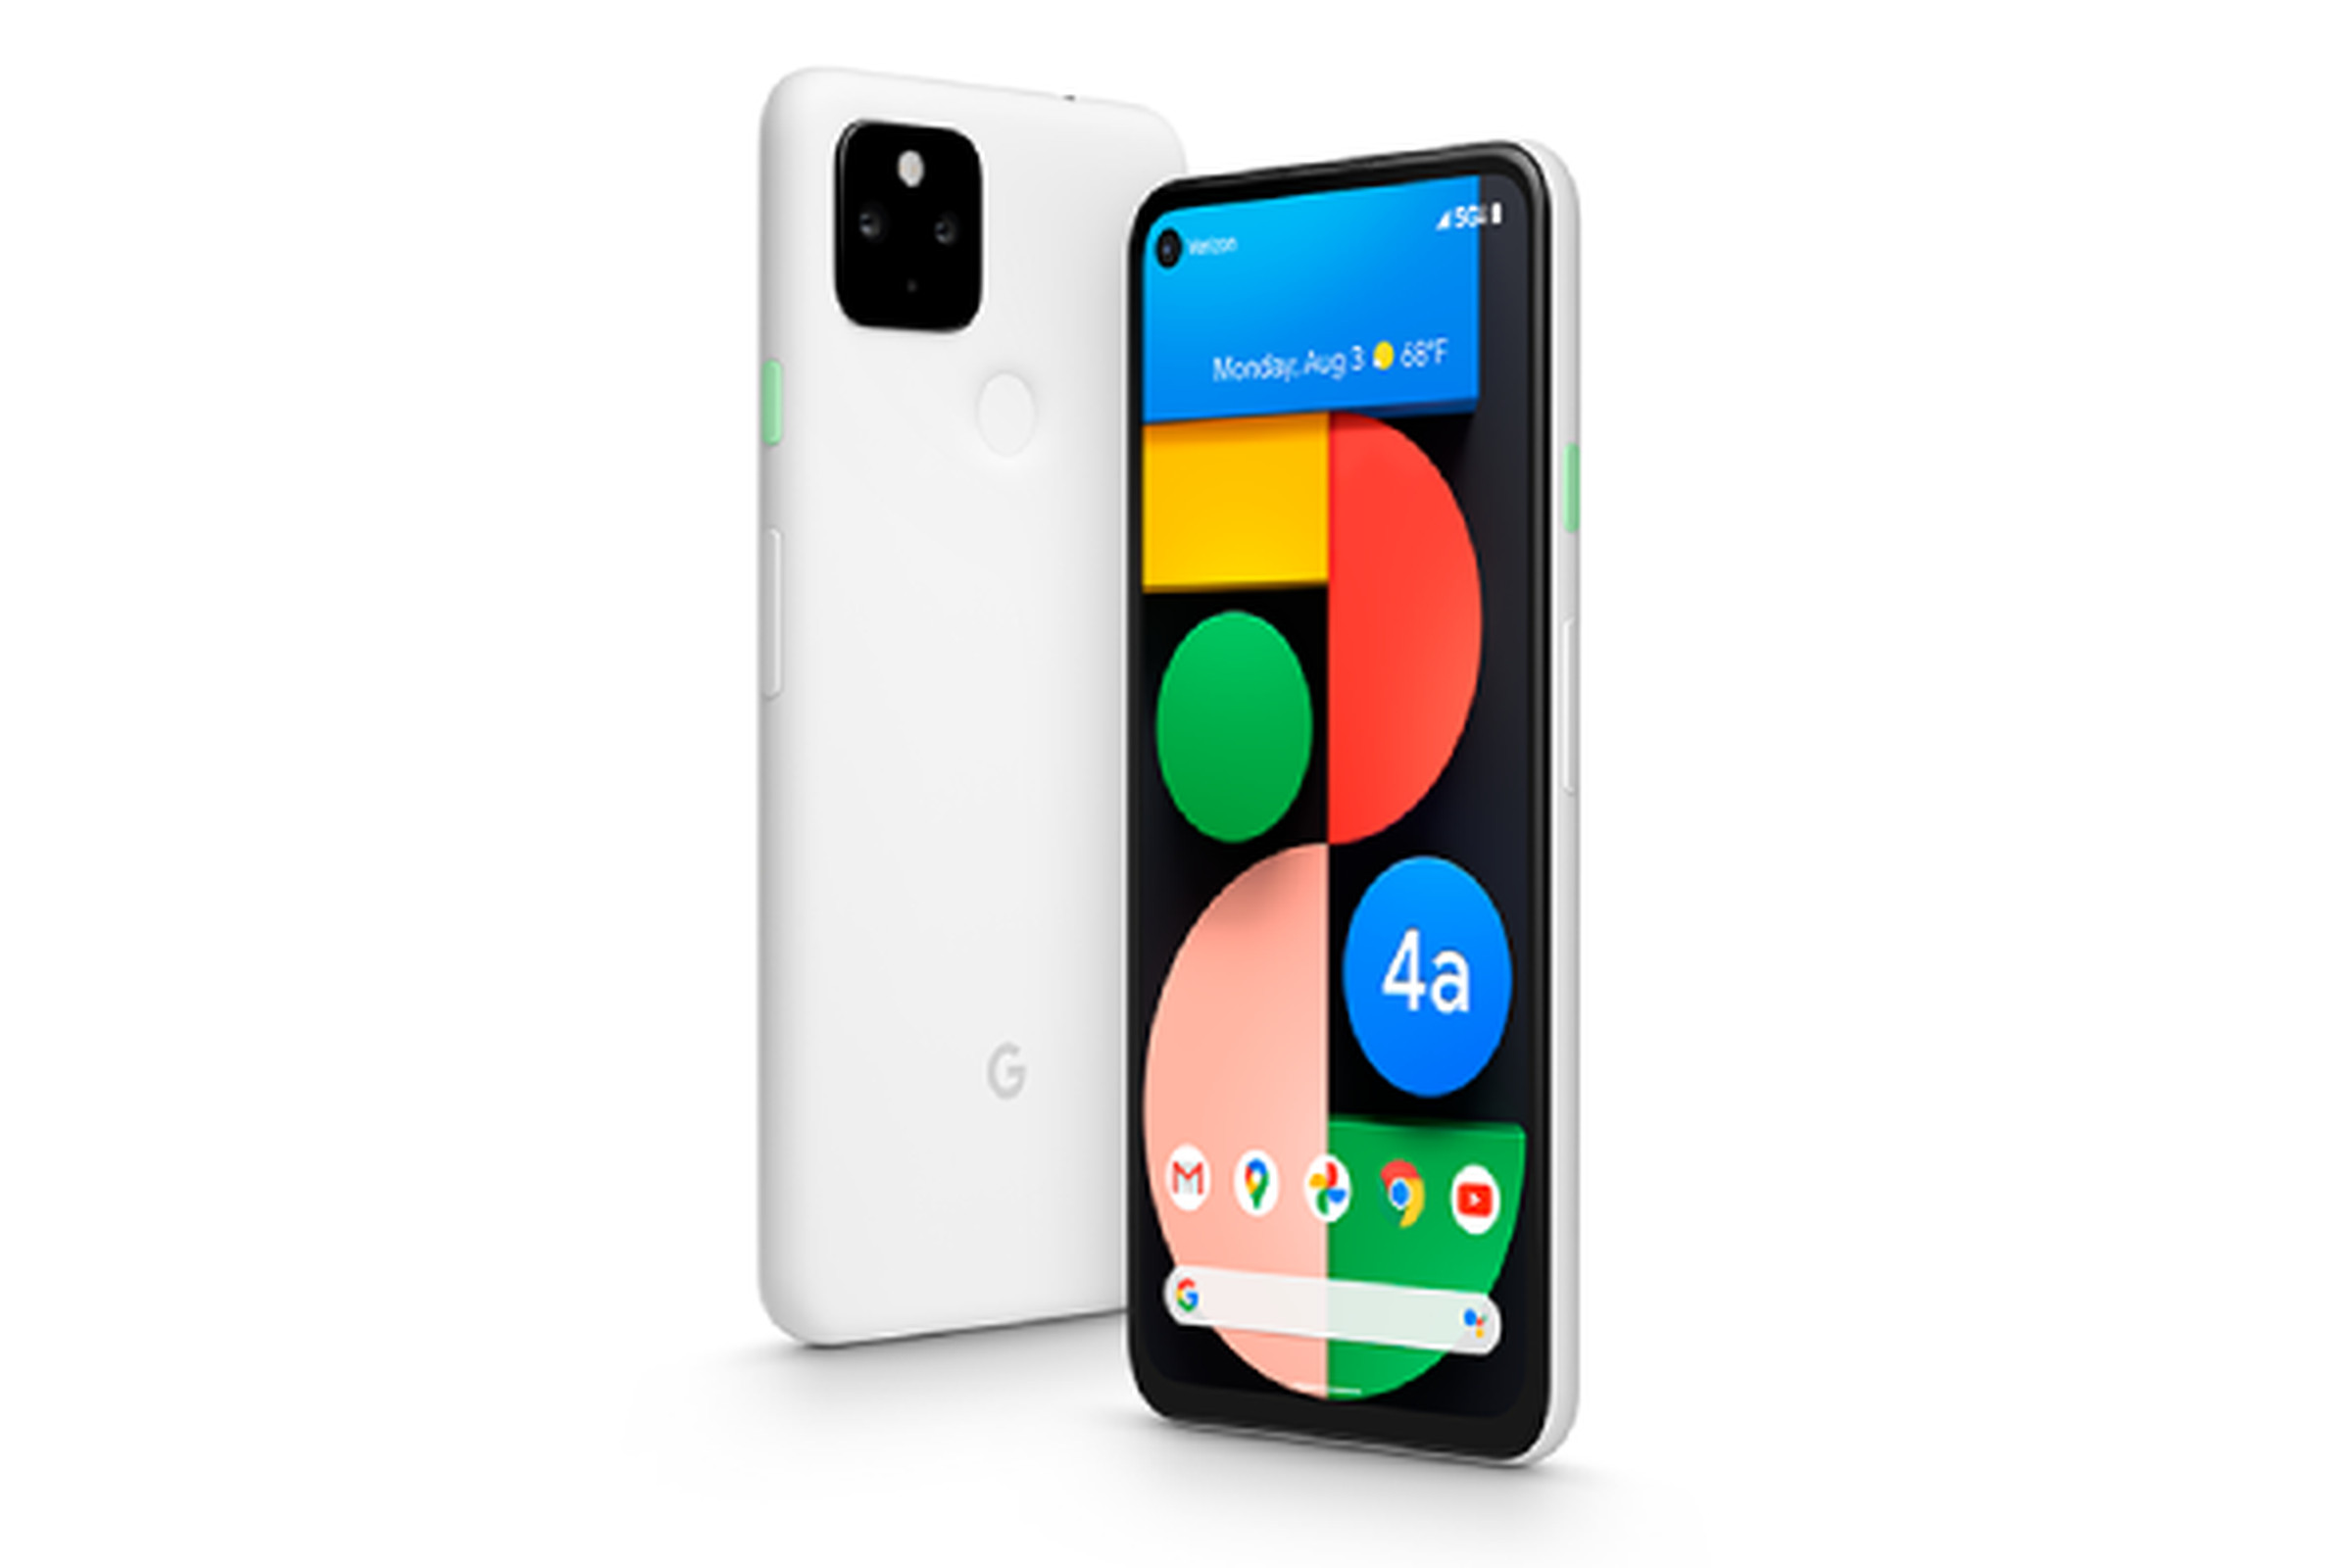 Pixel 4A 5G UW (Verizon exclusive model in “Clearly White”)